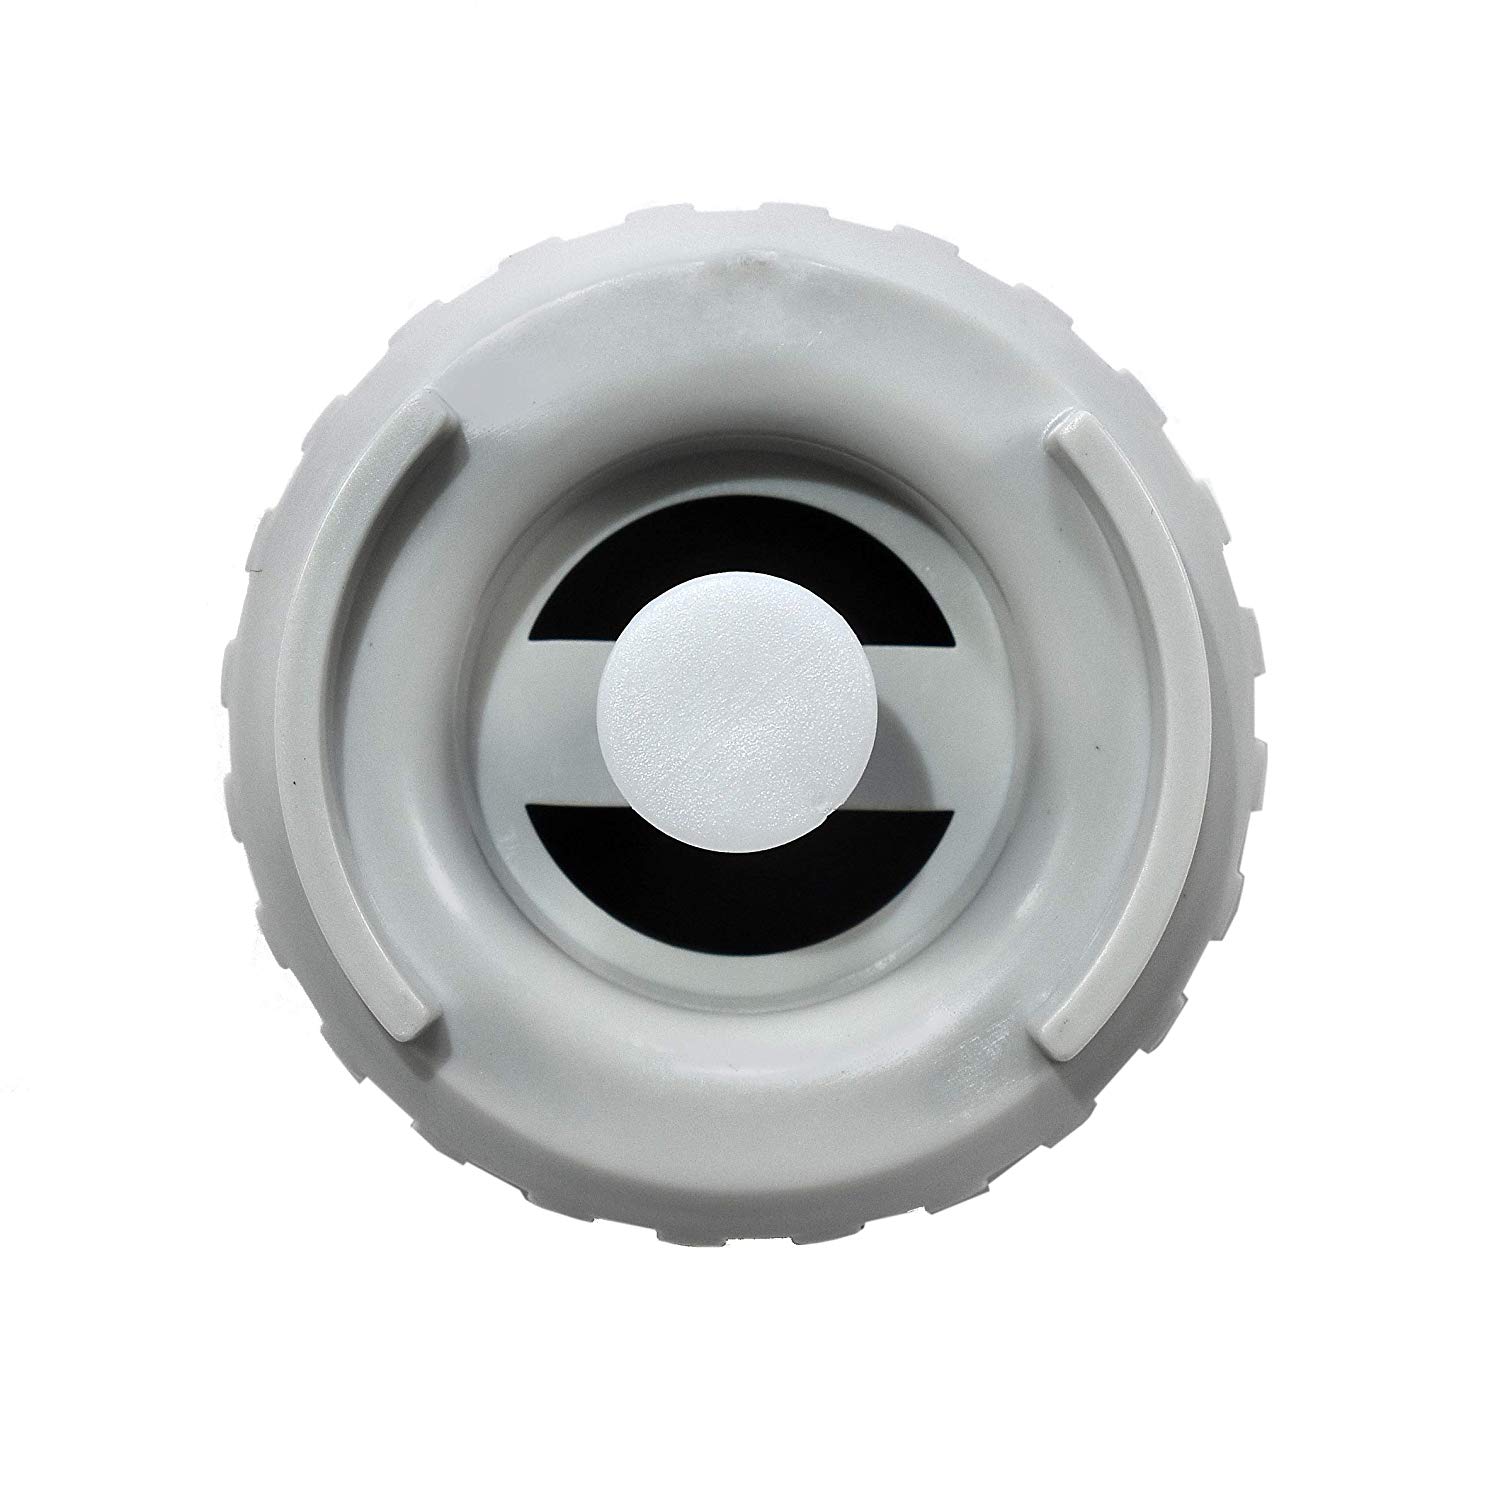 HQRP Bottle Cap with Valve Assembly for Essick Air MoistAir Humidifiers, 509229-1 822419-2 Replacement